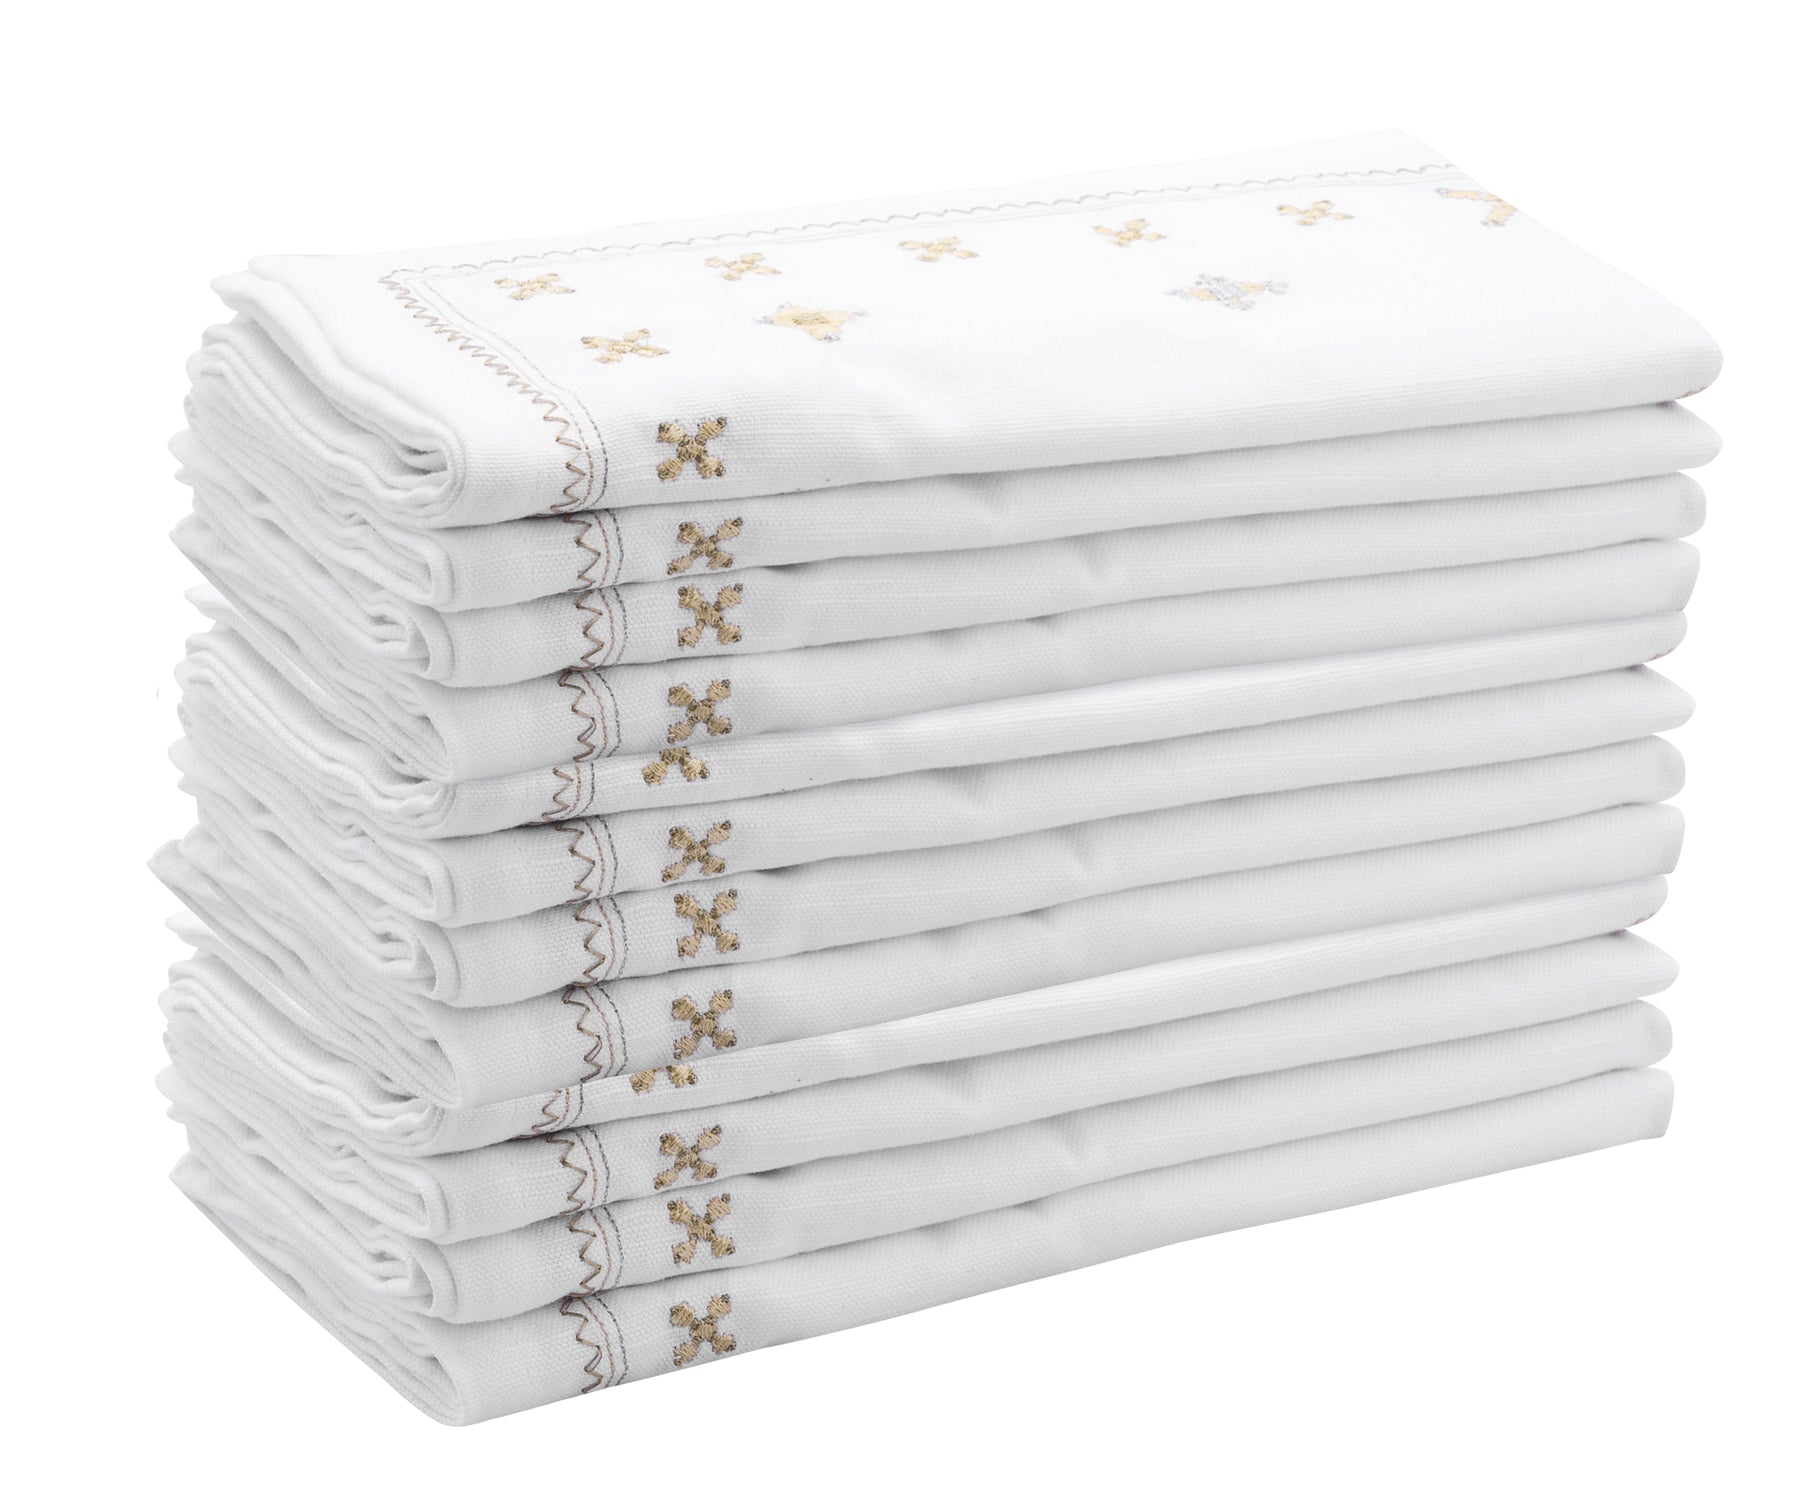 Luxurious gold cloth napkins for formal dining